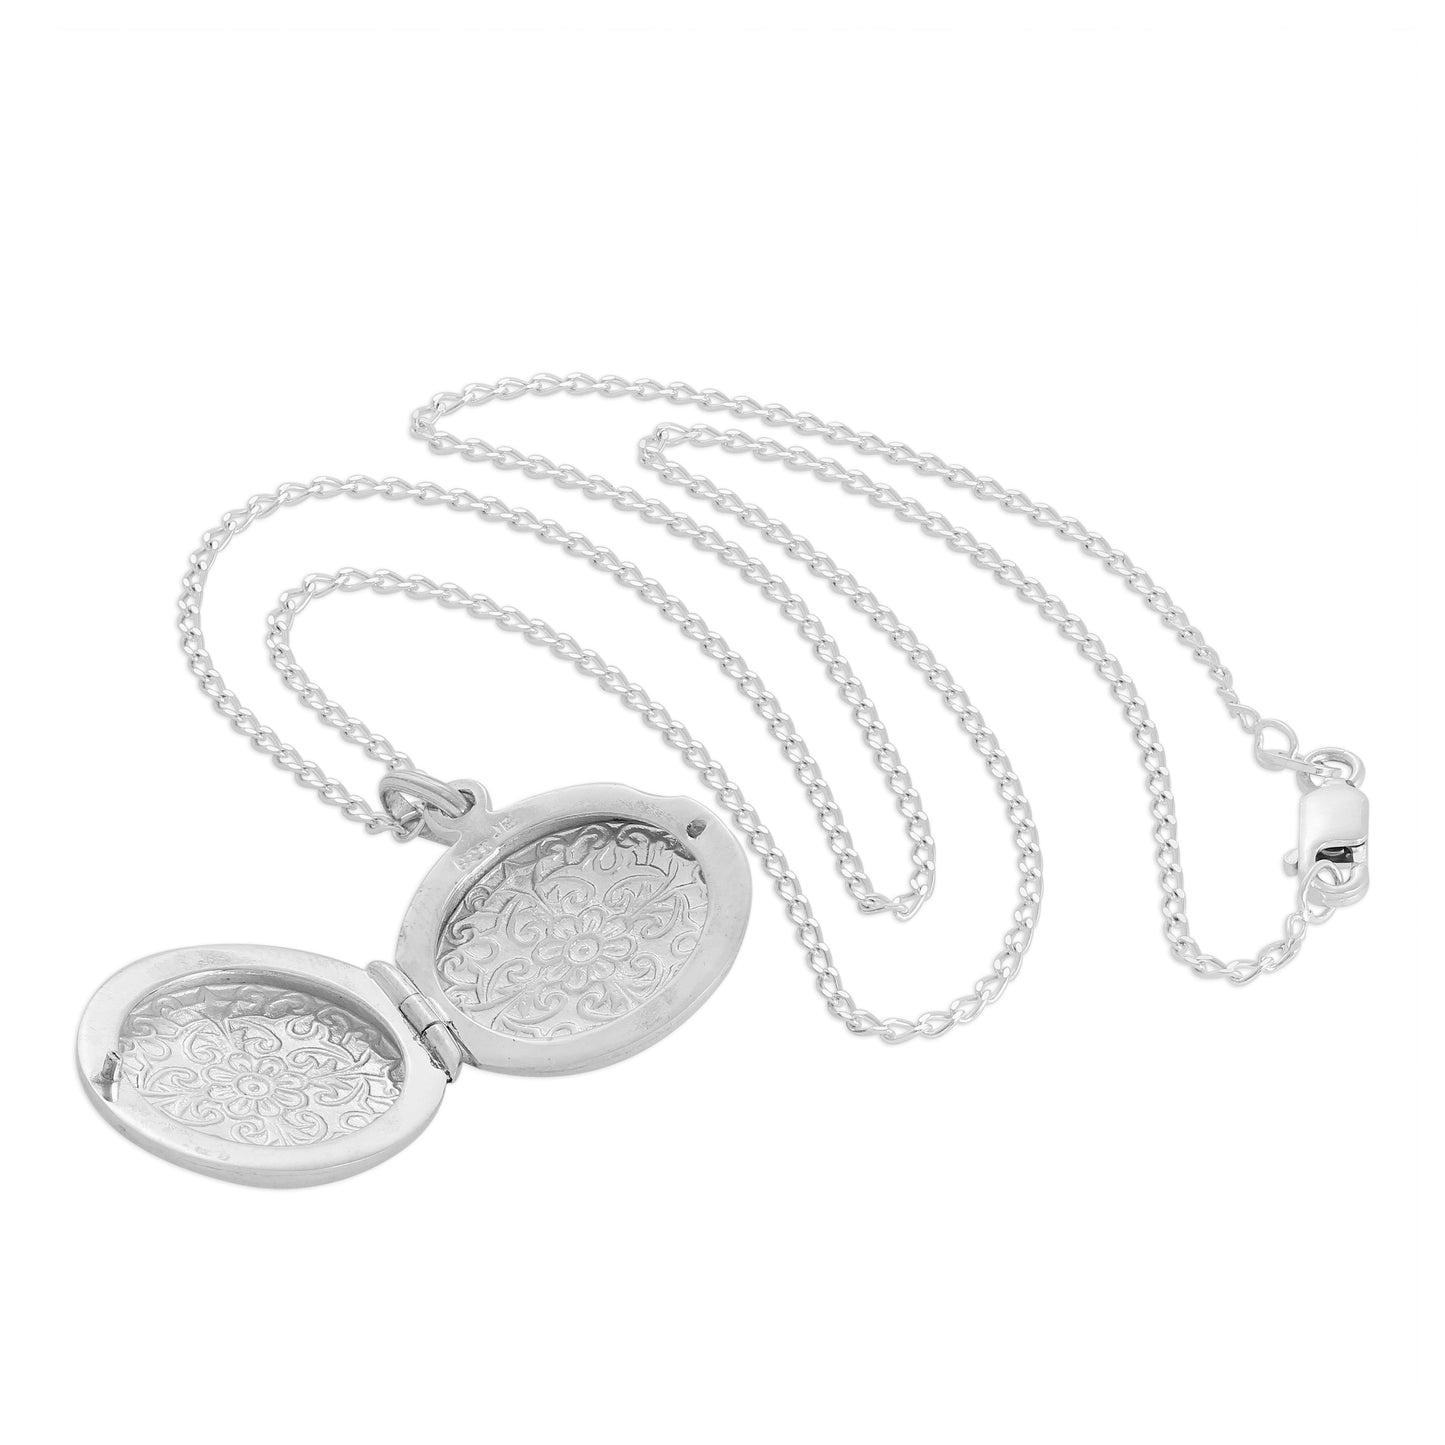 Small Round Sterling Silver Flower Locket on Chain 16 - 24 Inches